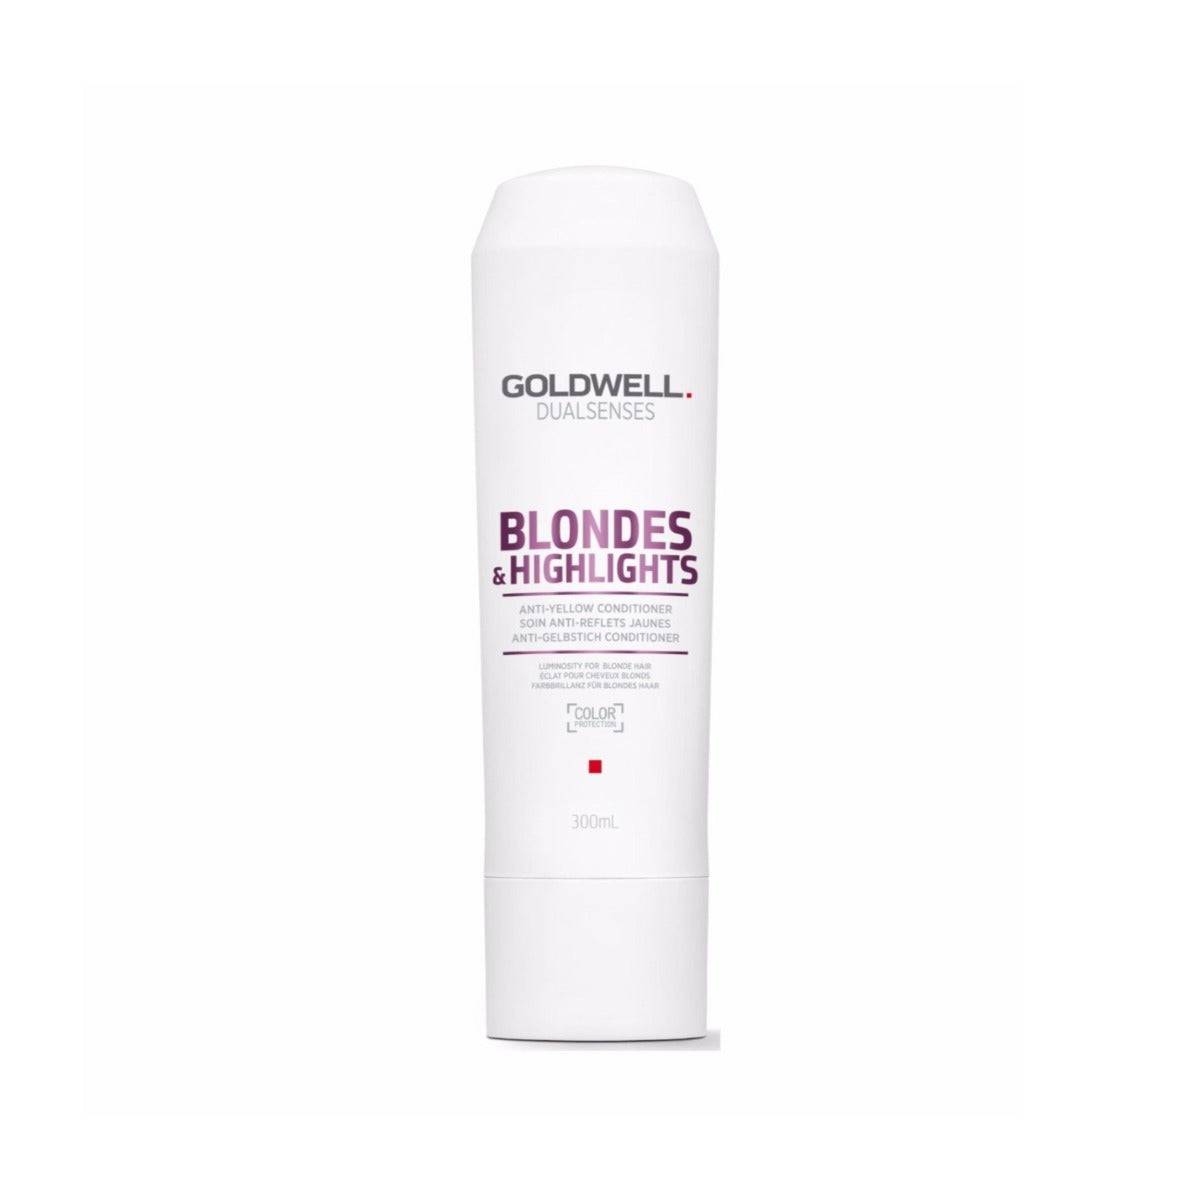 Goldwell Blondes & Highlights Anti Yellow Brassiness Conditioner Goldwell Dualsenses - On Line Hair Depot